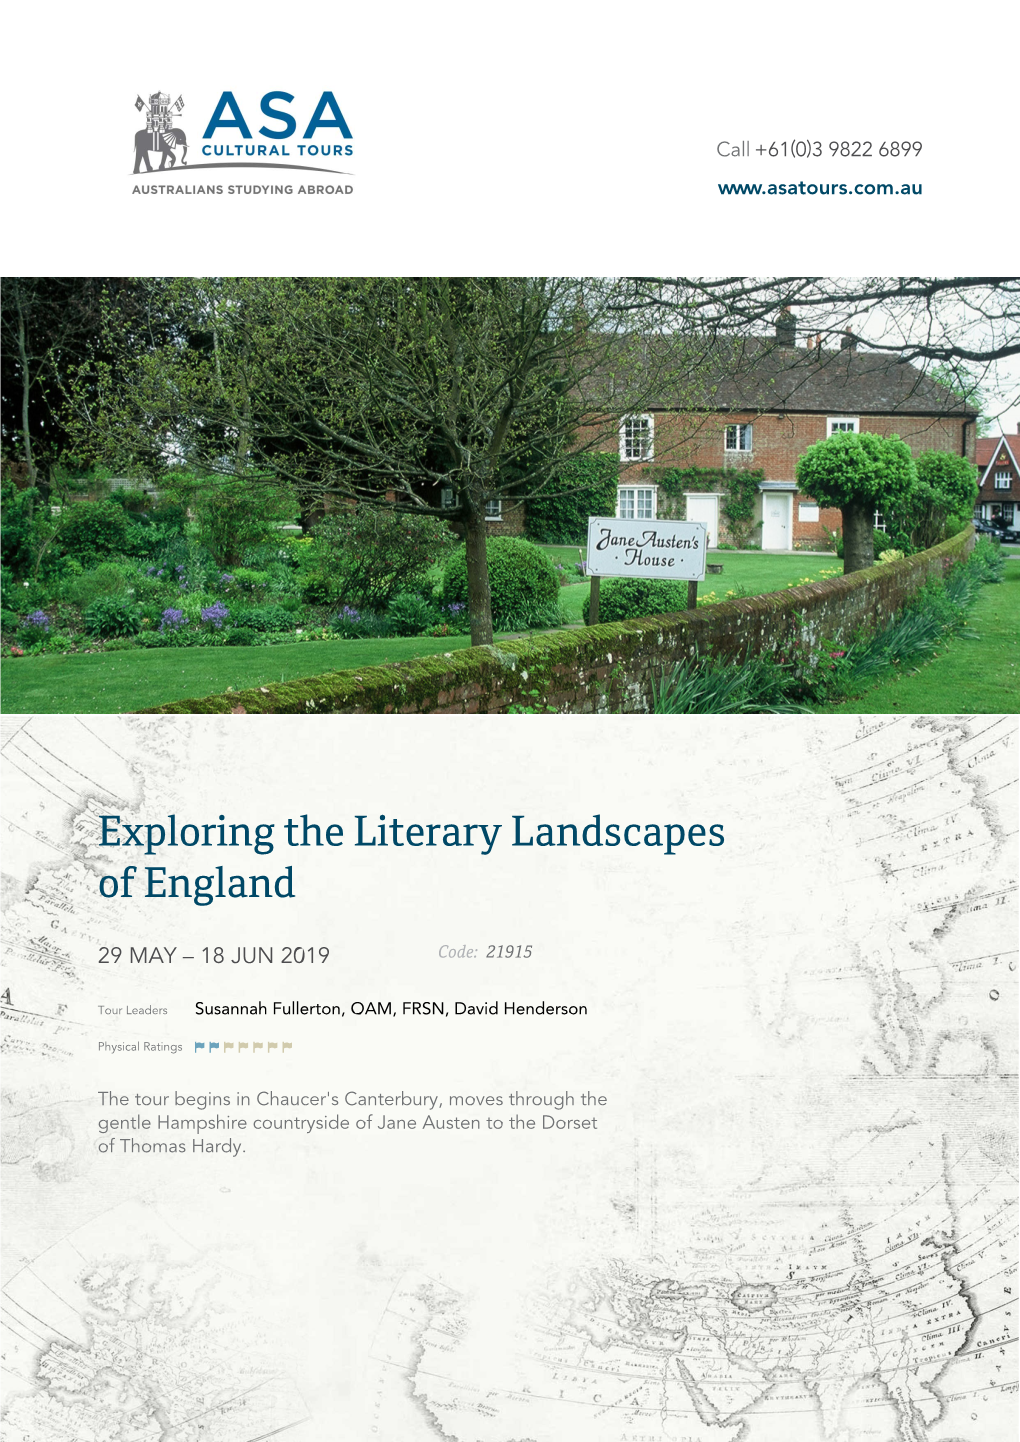 Exploring the Literary Landscapes of England